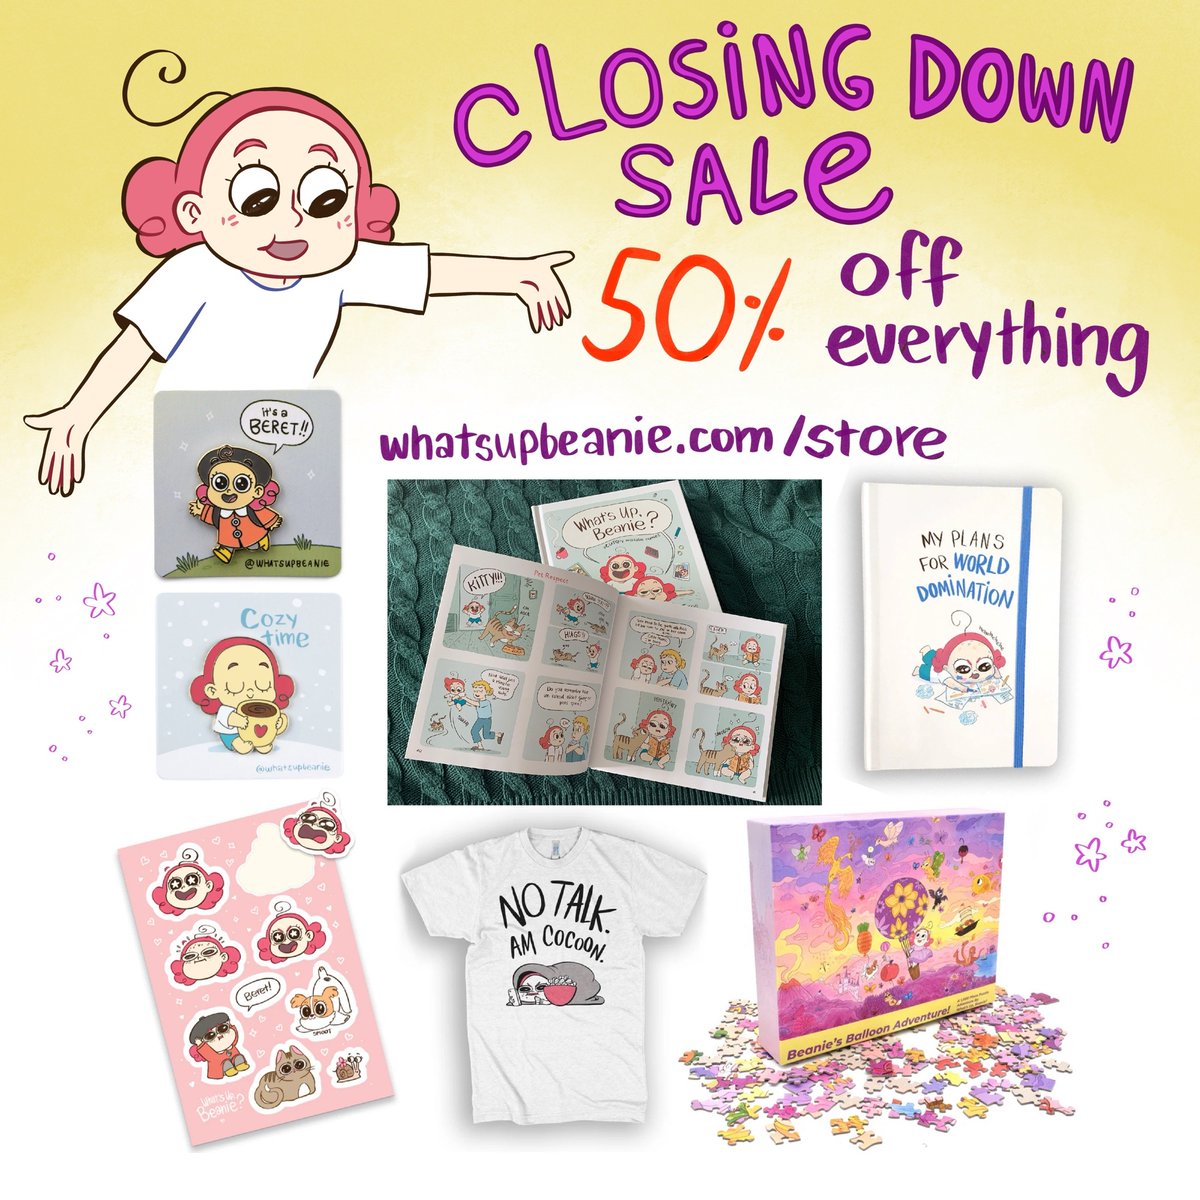 Hello!! I’m having a big sale in my store to clear out stock! I’m temporarily putting a pause on merch to focus on other things so this might be your last chance to get one of these items ❤️ whatsupbeanie.com/store